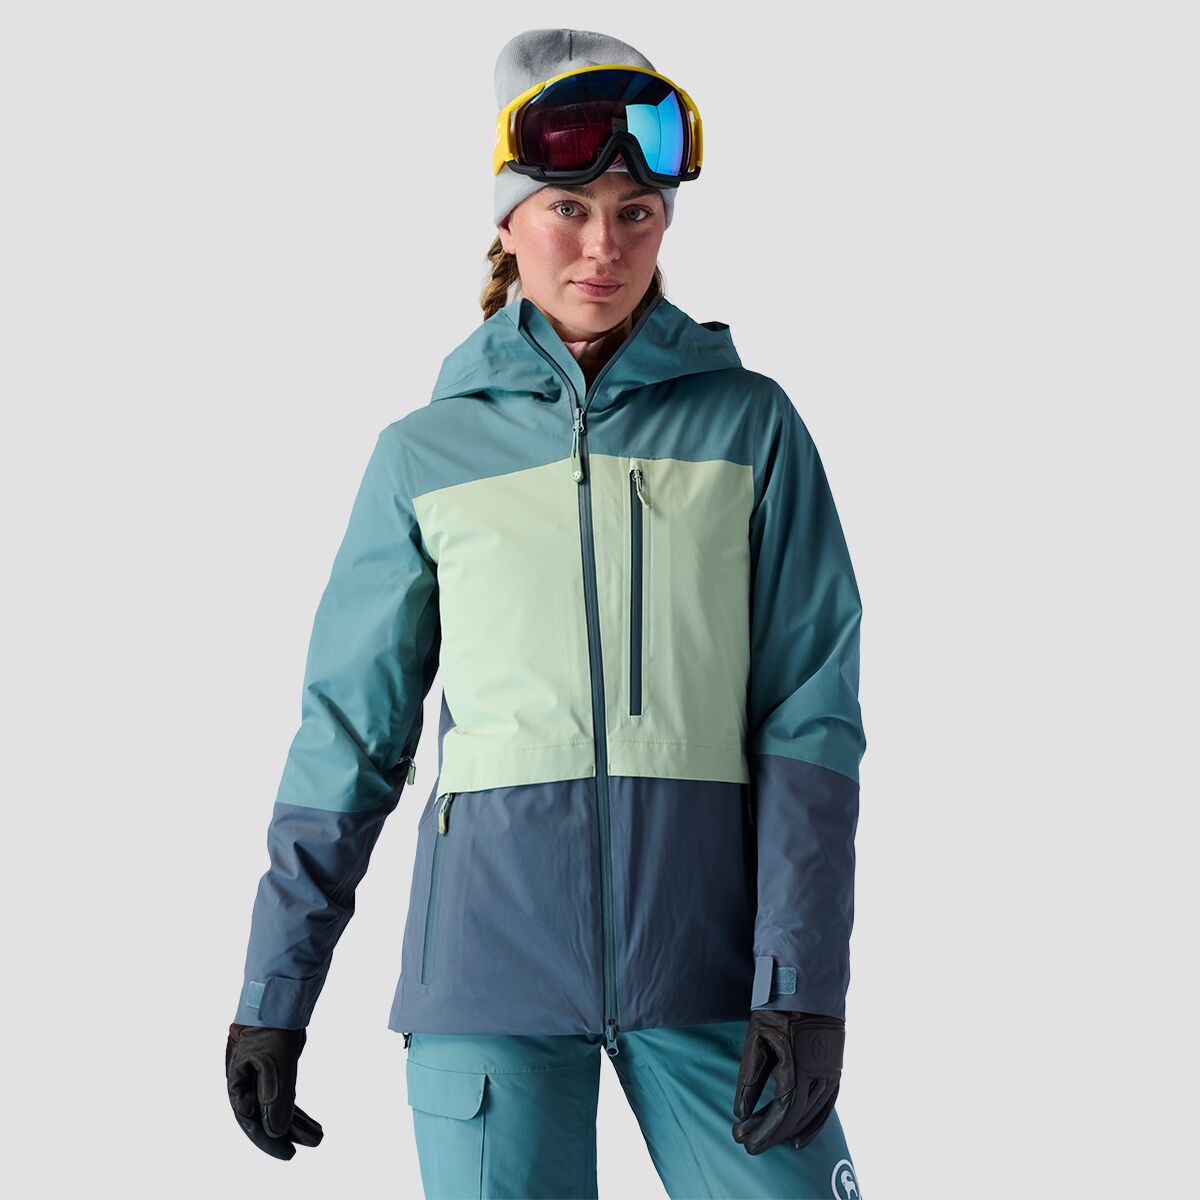 Backcountry Last Chair Stretch Insulated Jacket - Women's Goblin Blue/Reseda/Turbulence